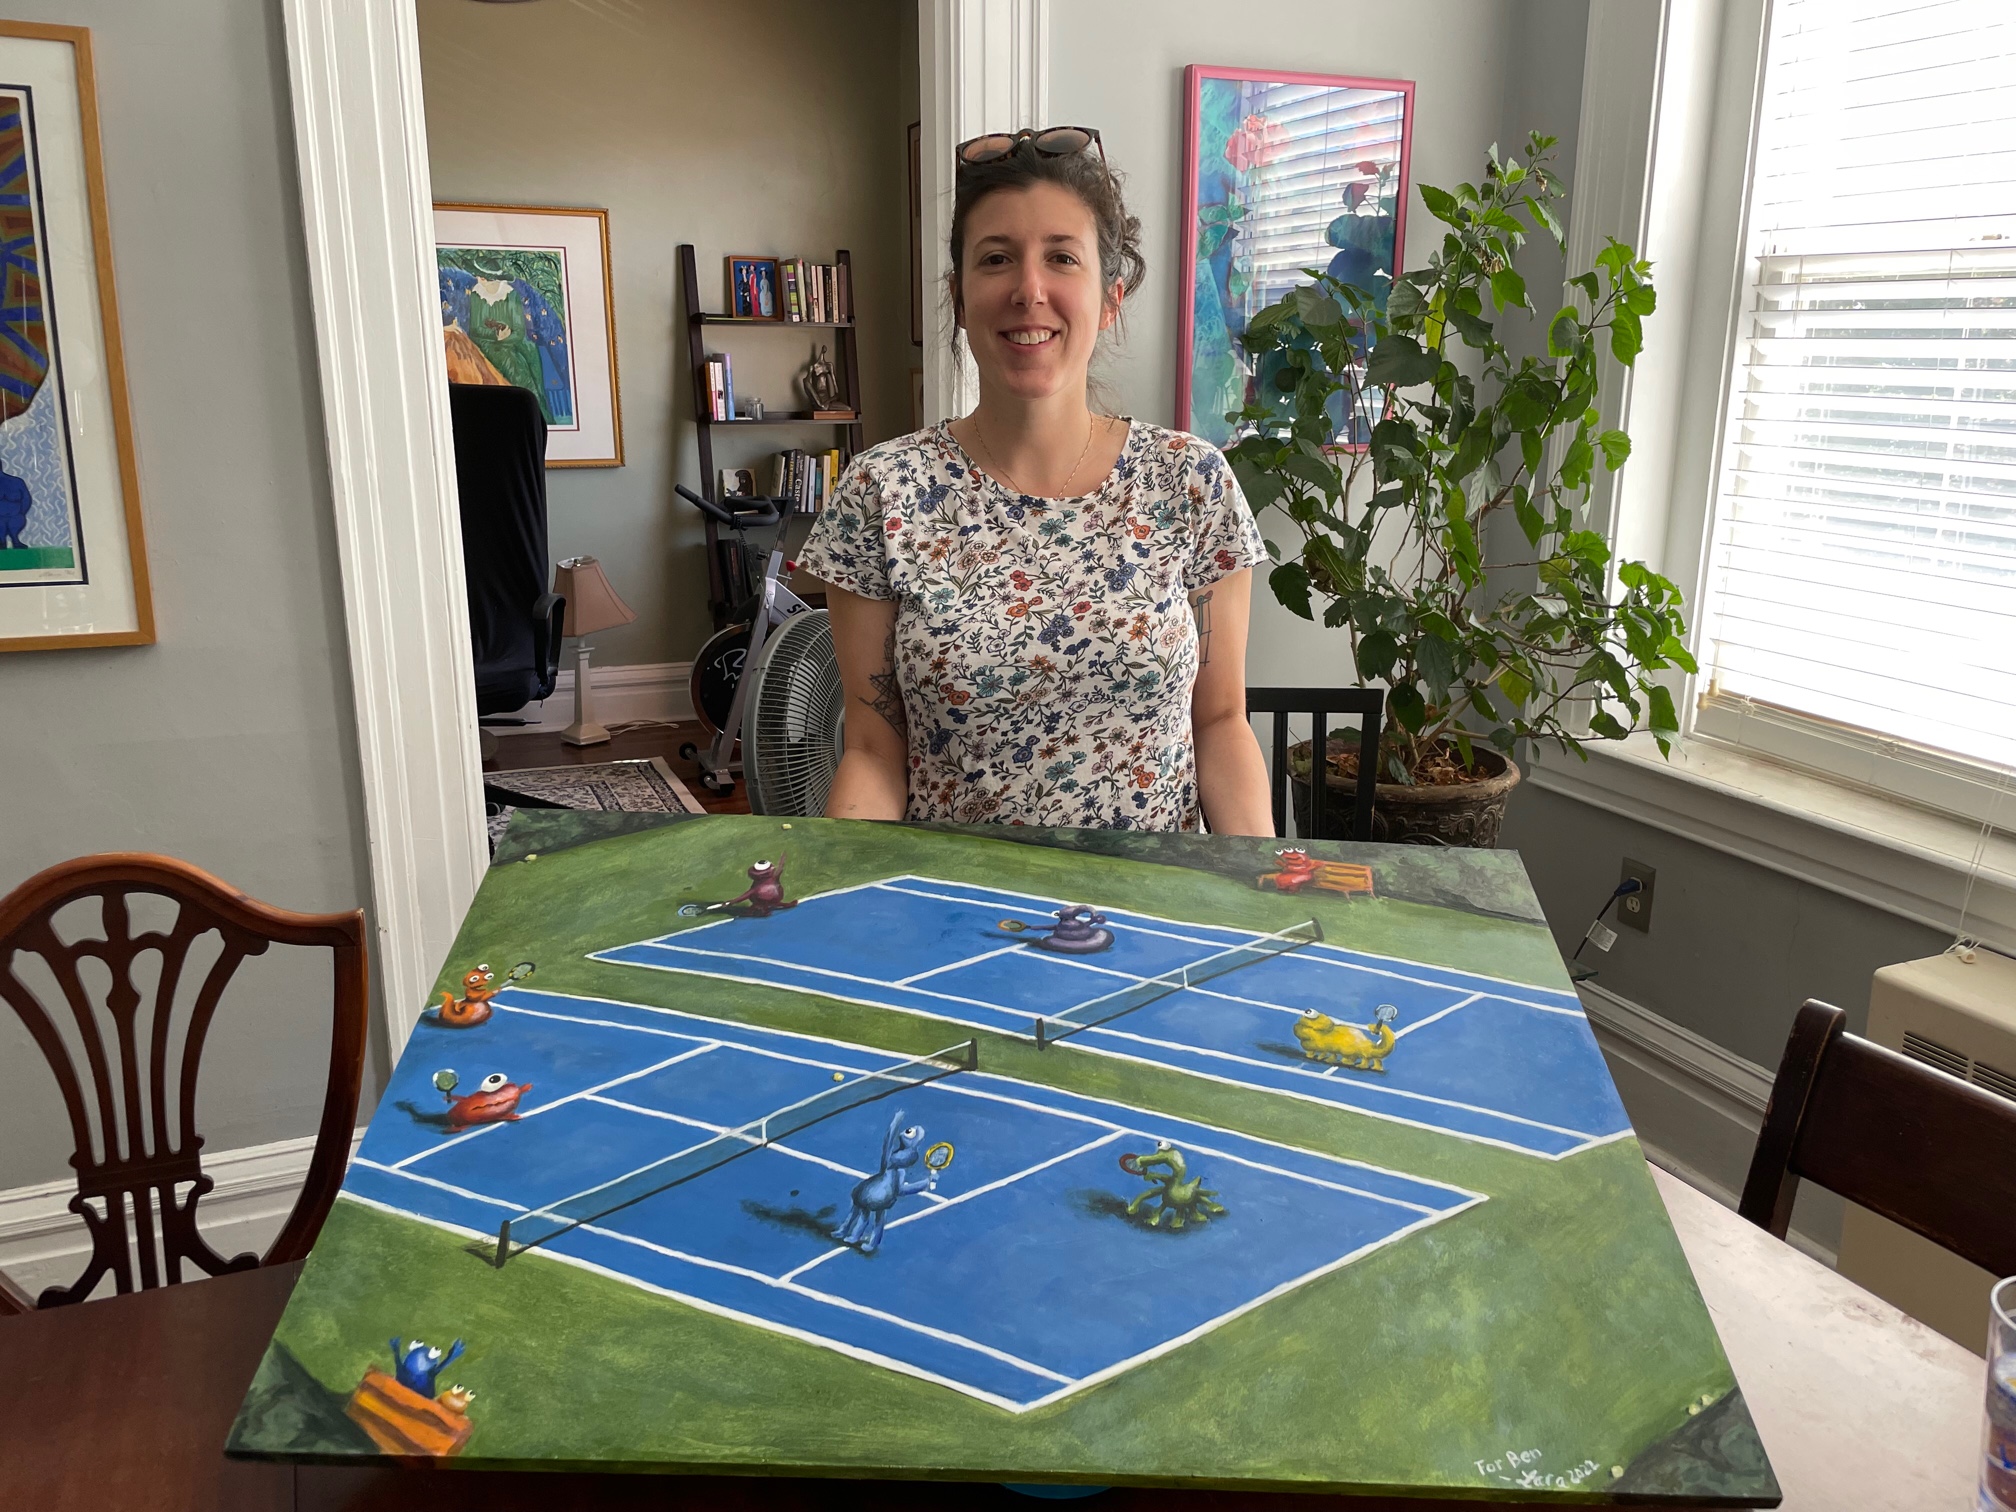 A white woman with brown hair and T Shirt with flowers on holding a large board with a painting of brightly colored small monsters playing tennis on two blue and green tennis courts. There are small benches with monsters viewing on the sides.